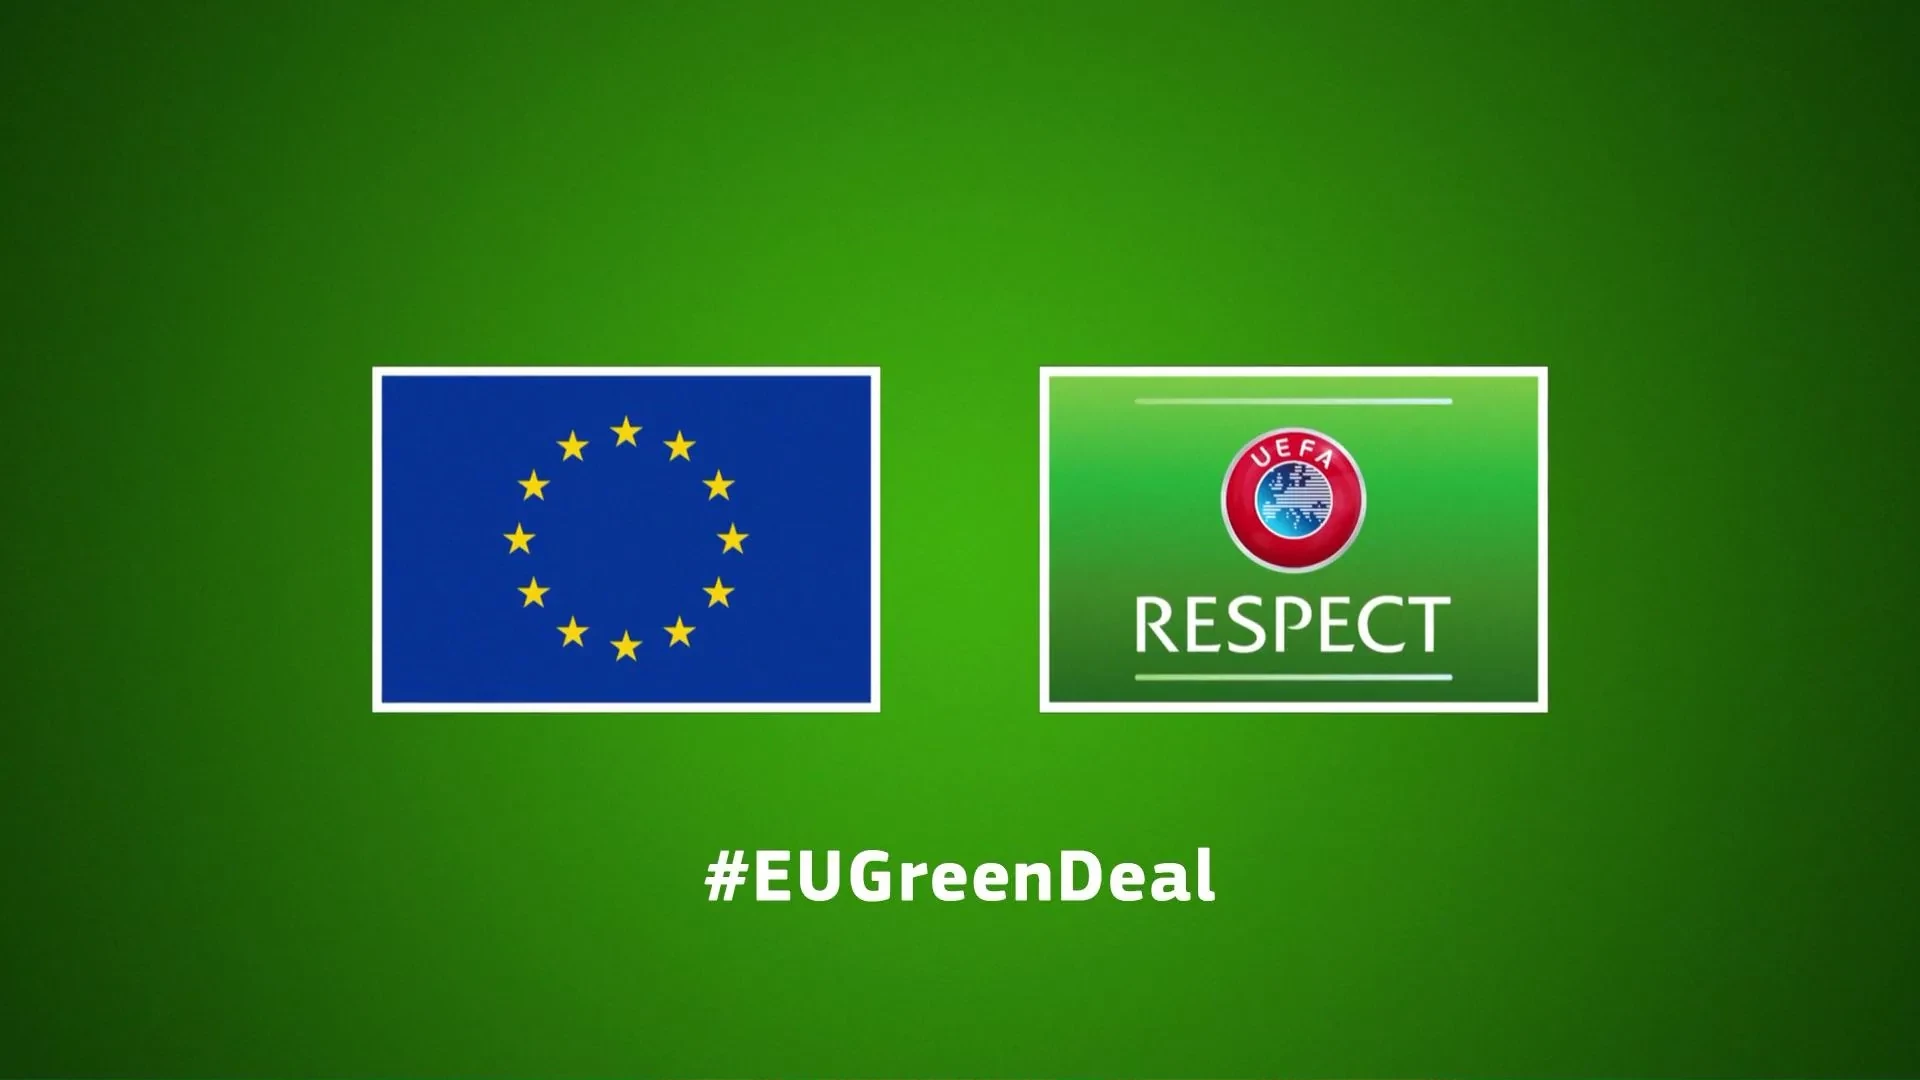 This is the second season in UEFA's three-year deal to run a TV campaign with the European Commission to promote the EU's Green Deal ©UEFA